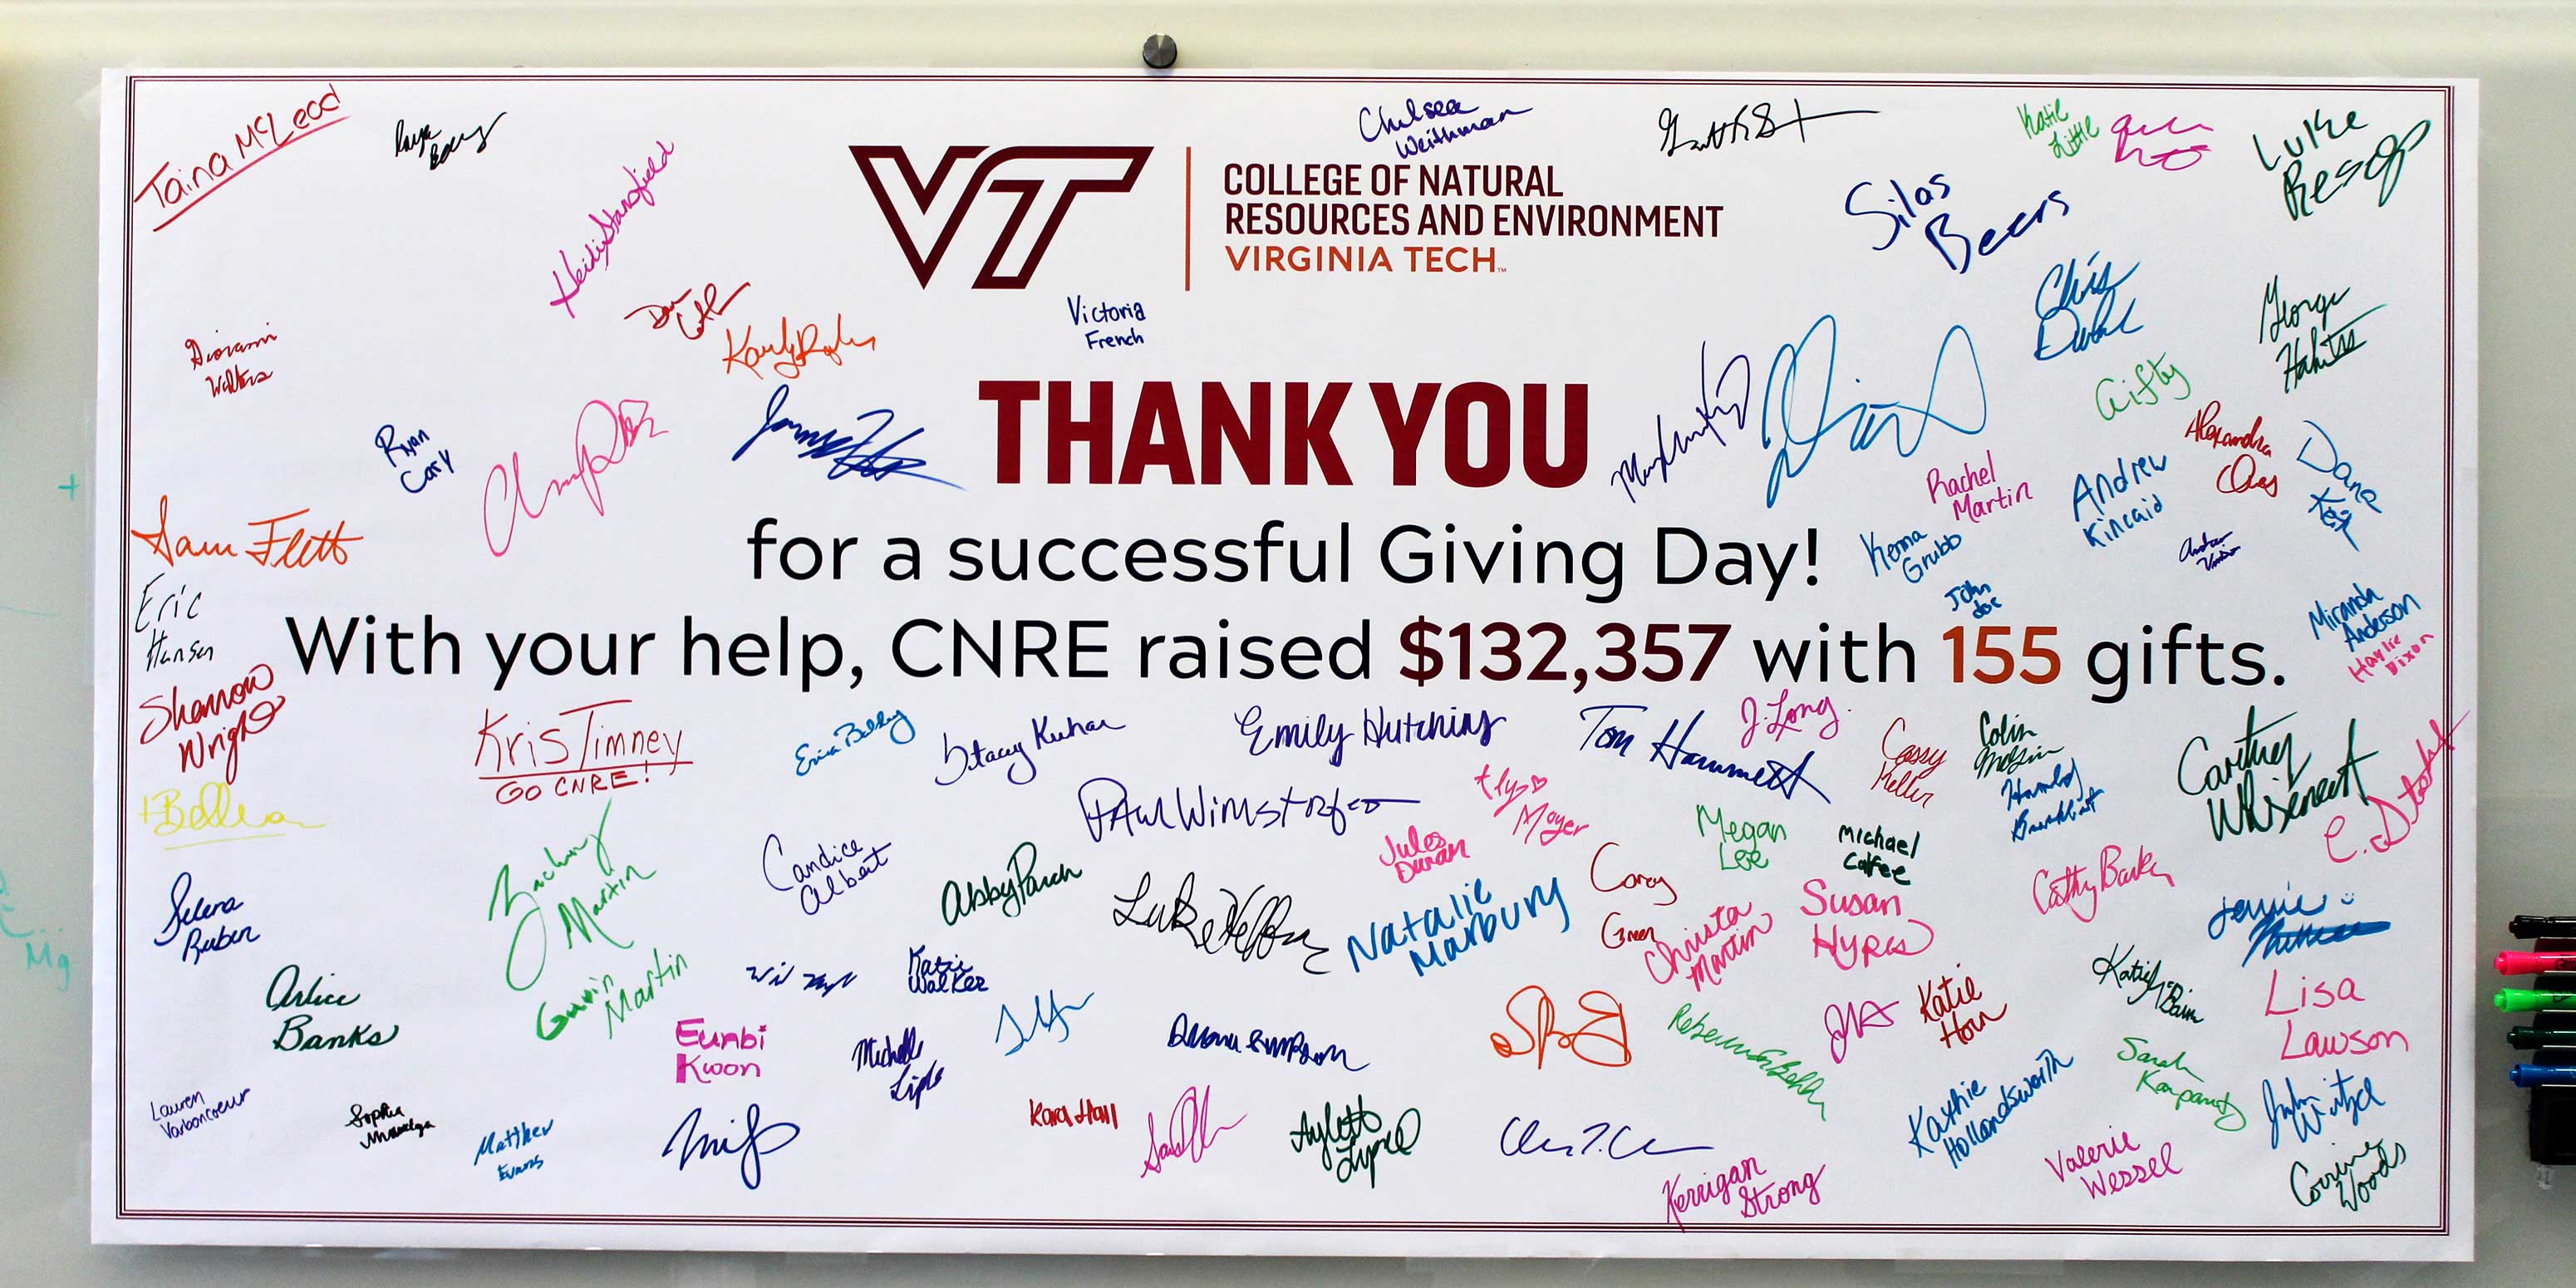 A large white board with text reading “Thank you for a successful Giving Day! With your help, CNRE raised $132,357 with 155 gifts.” and many hand-written signatures.